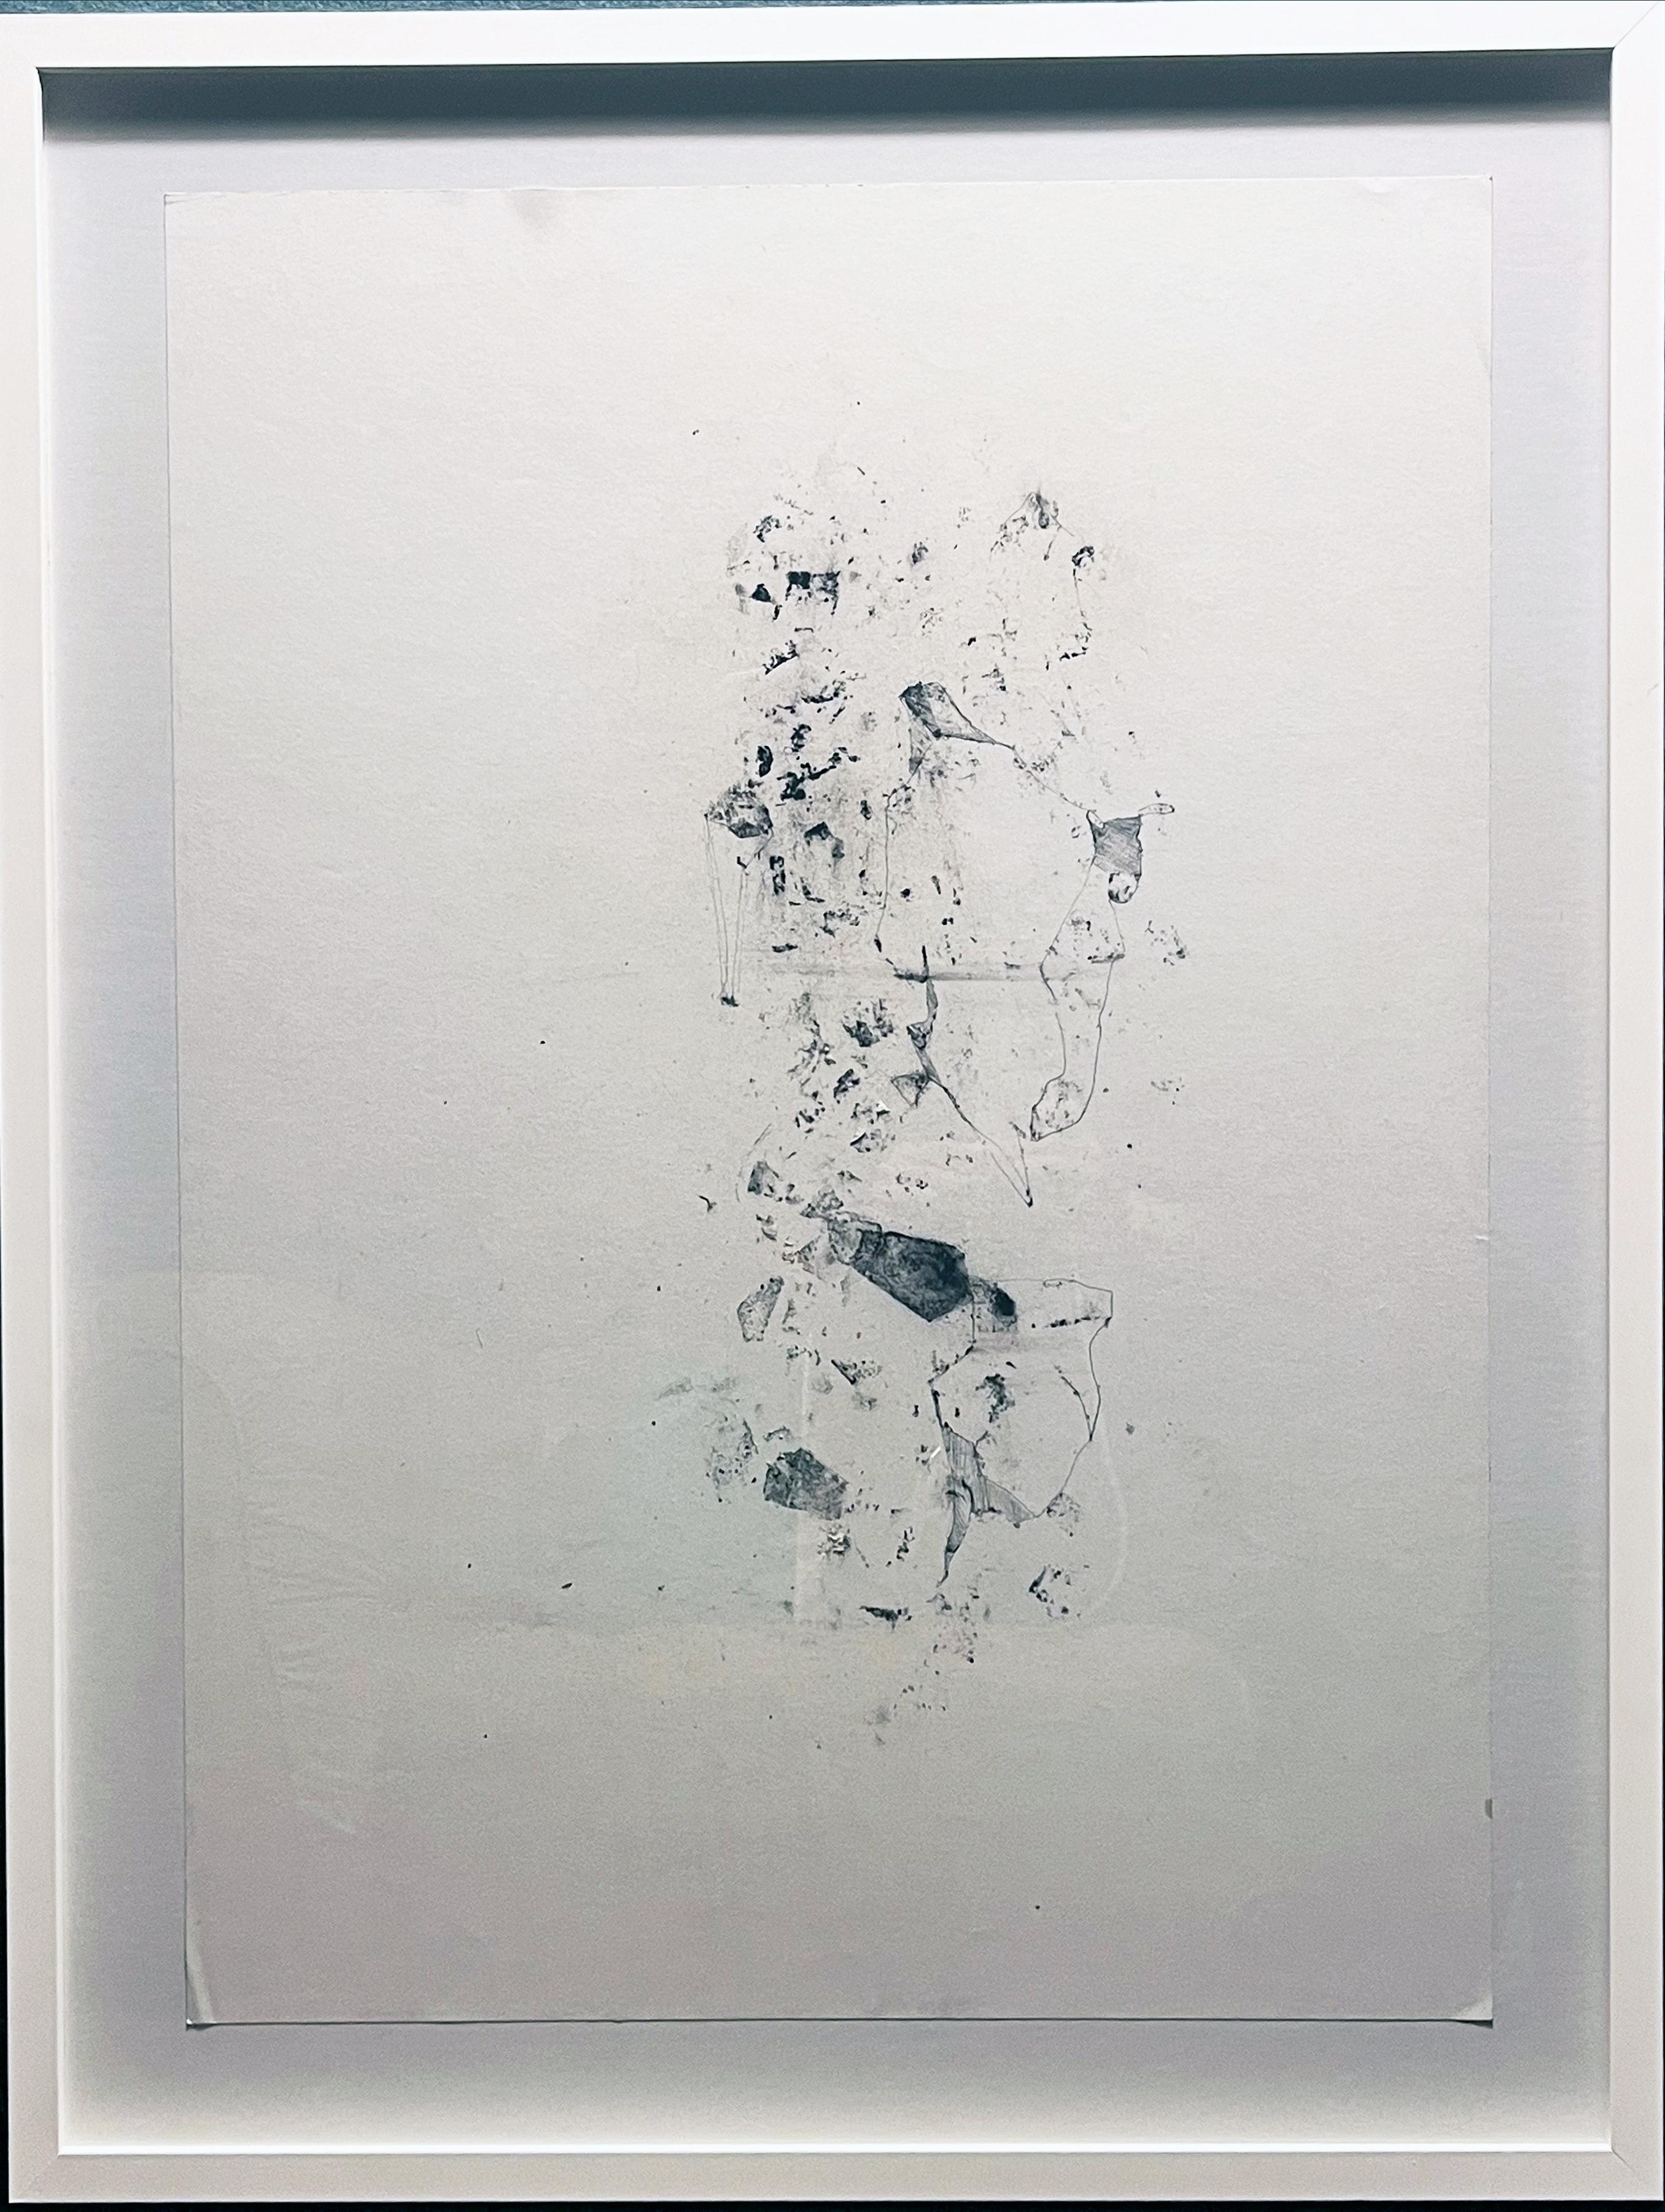 Title: Fragment

Medium: Graphite on Canson paper, 
50x70 cm,
 mounted on white wooden frame 63x83 cm, 
ready to hang

Description:

This unique charcoal drawing by Marilina Marchica explores the theme of ruins and the relationship between humans